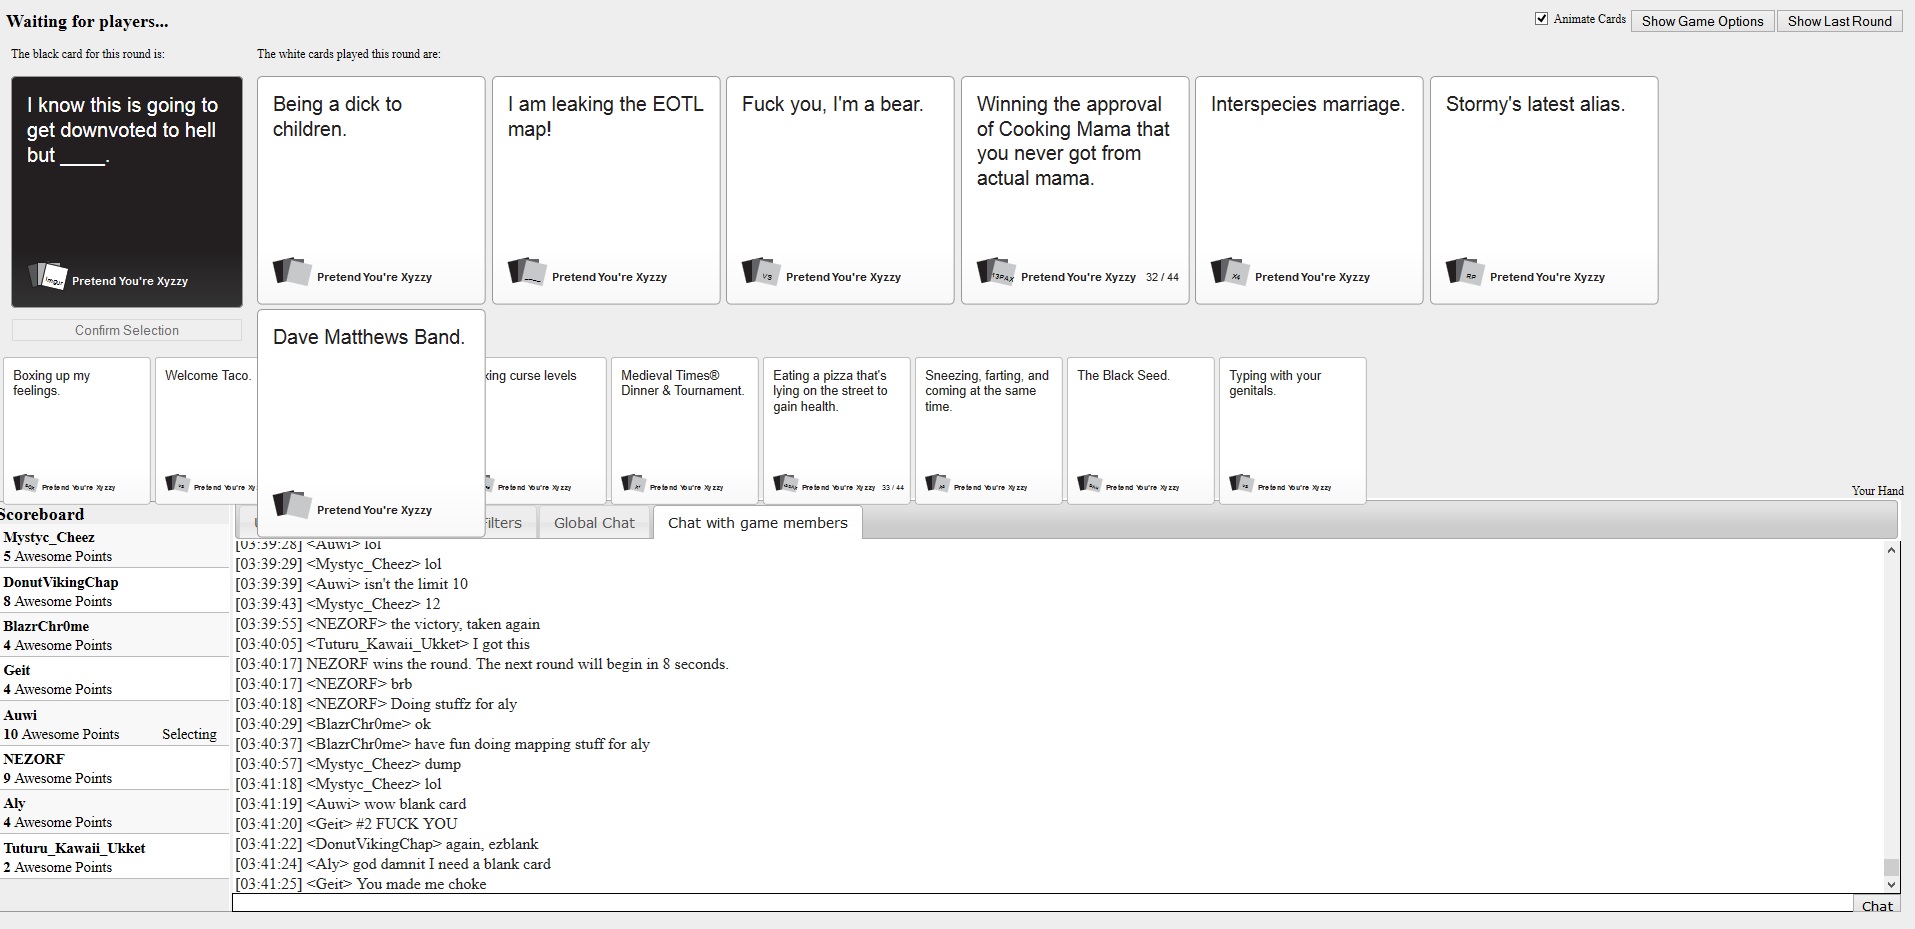 Codes pretend card youre xyzzy Card Cast